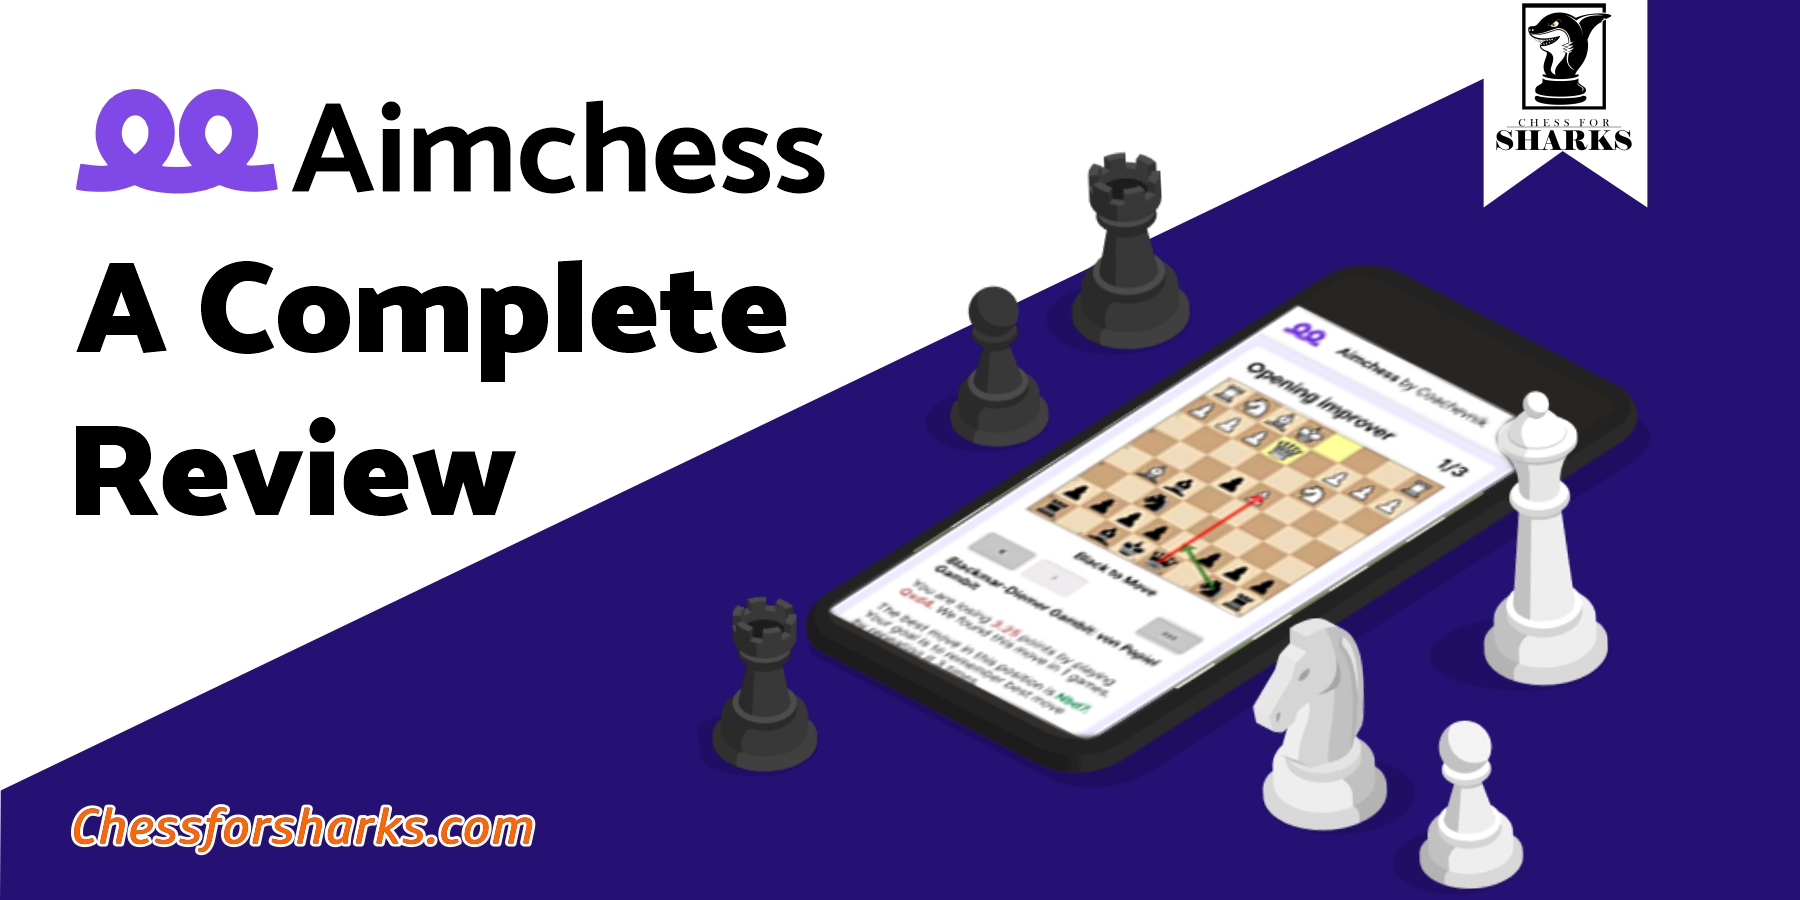 A Complete Aimchess Review: Unique Tool That Helps You Improve Your Chess!